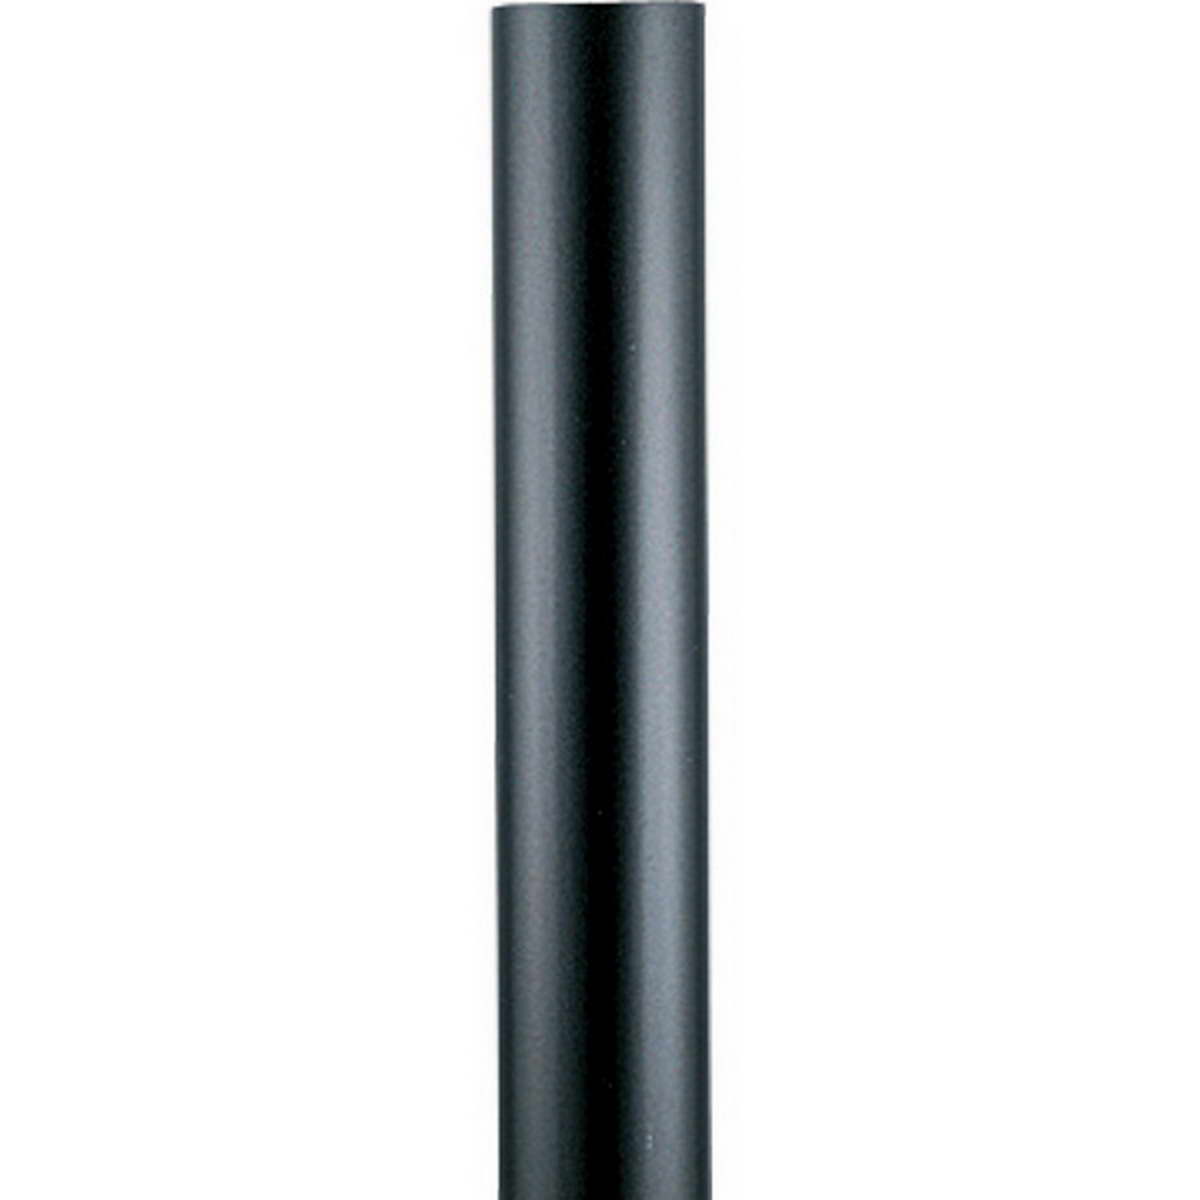 12 Ft Round Aluminum Direct Burial Pole 3 In. Shaft Black Finish - Bees Lighting